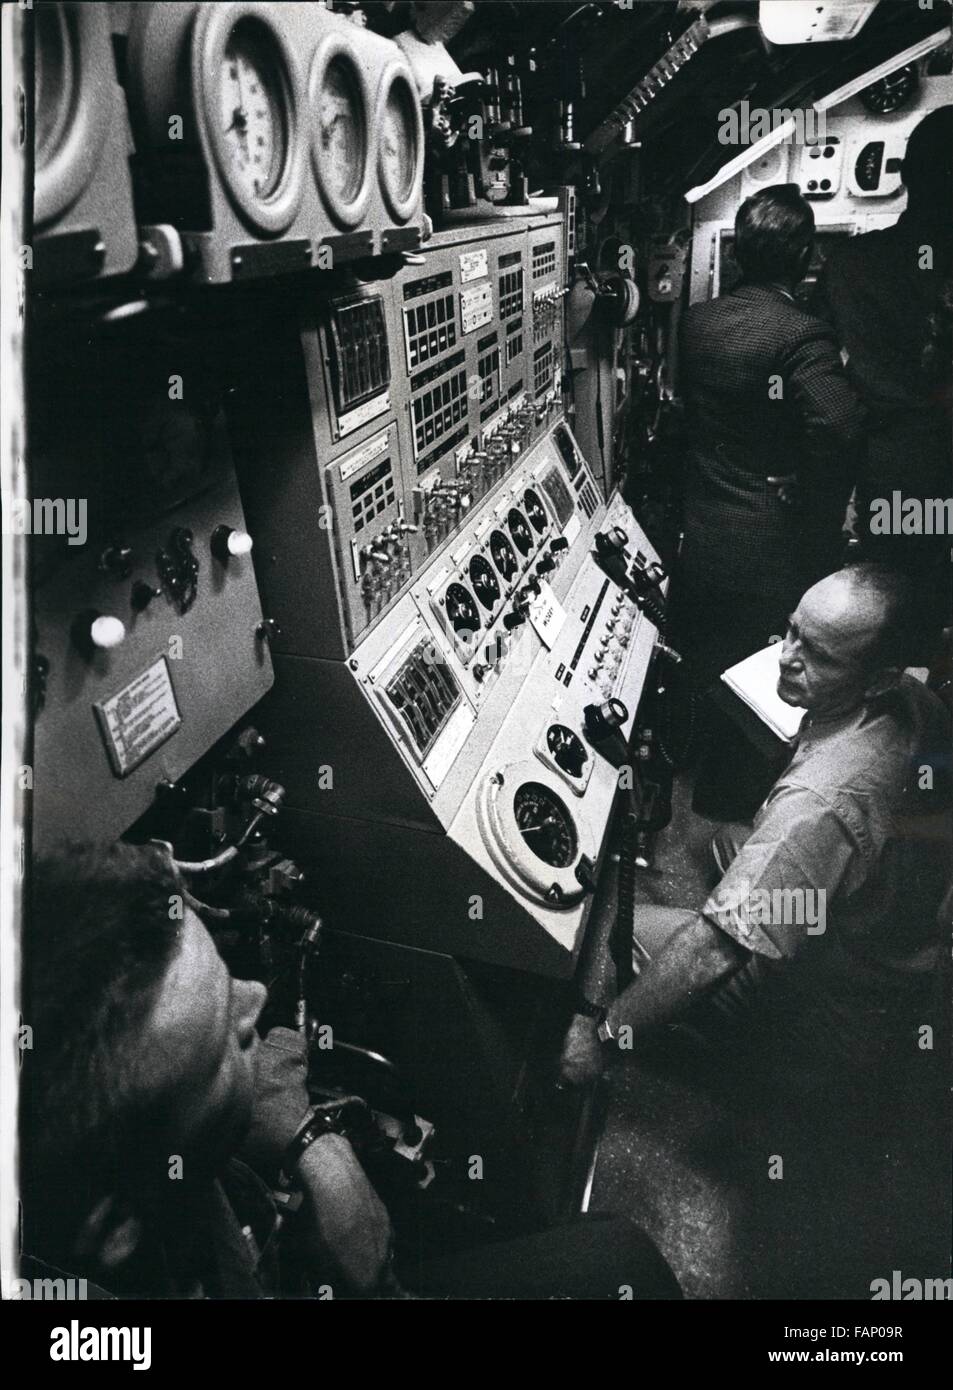 1961 - Part Of The ''Brain Box'' Of AK/Tom Sub: The control Room of Scorpion showing the control panel with its mass of buttons, handles and control levers for the ballast tanks.atomic submarine 2009 - USS Scorpion Buried at Sea © Keystone Pictures USA/ZUMAPRESS.com/Alamy Live News Stock Photo